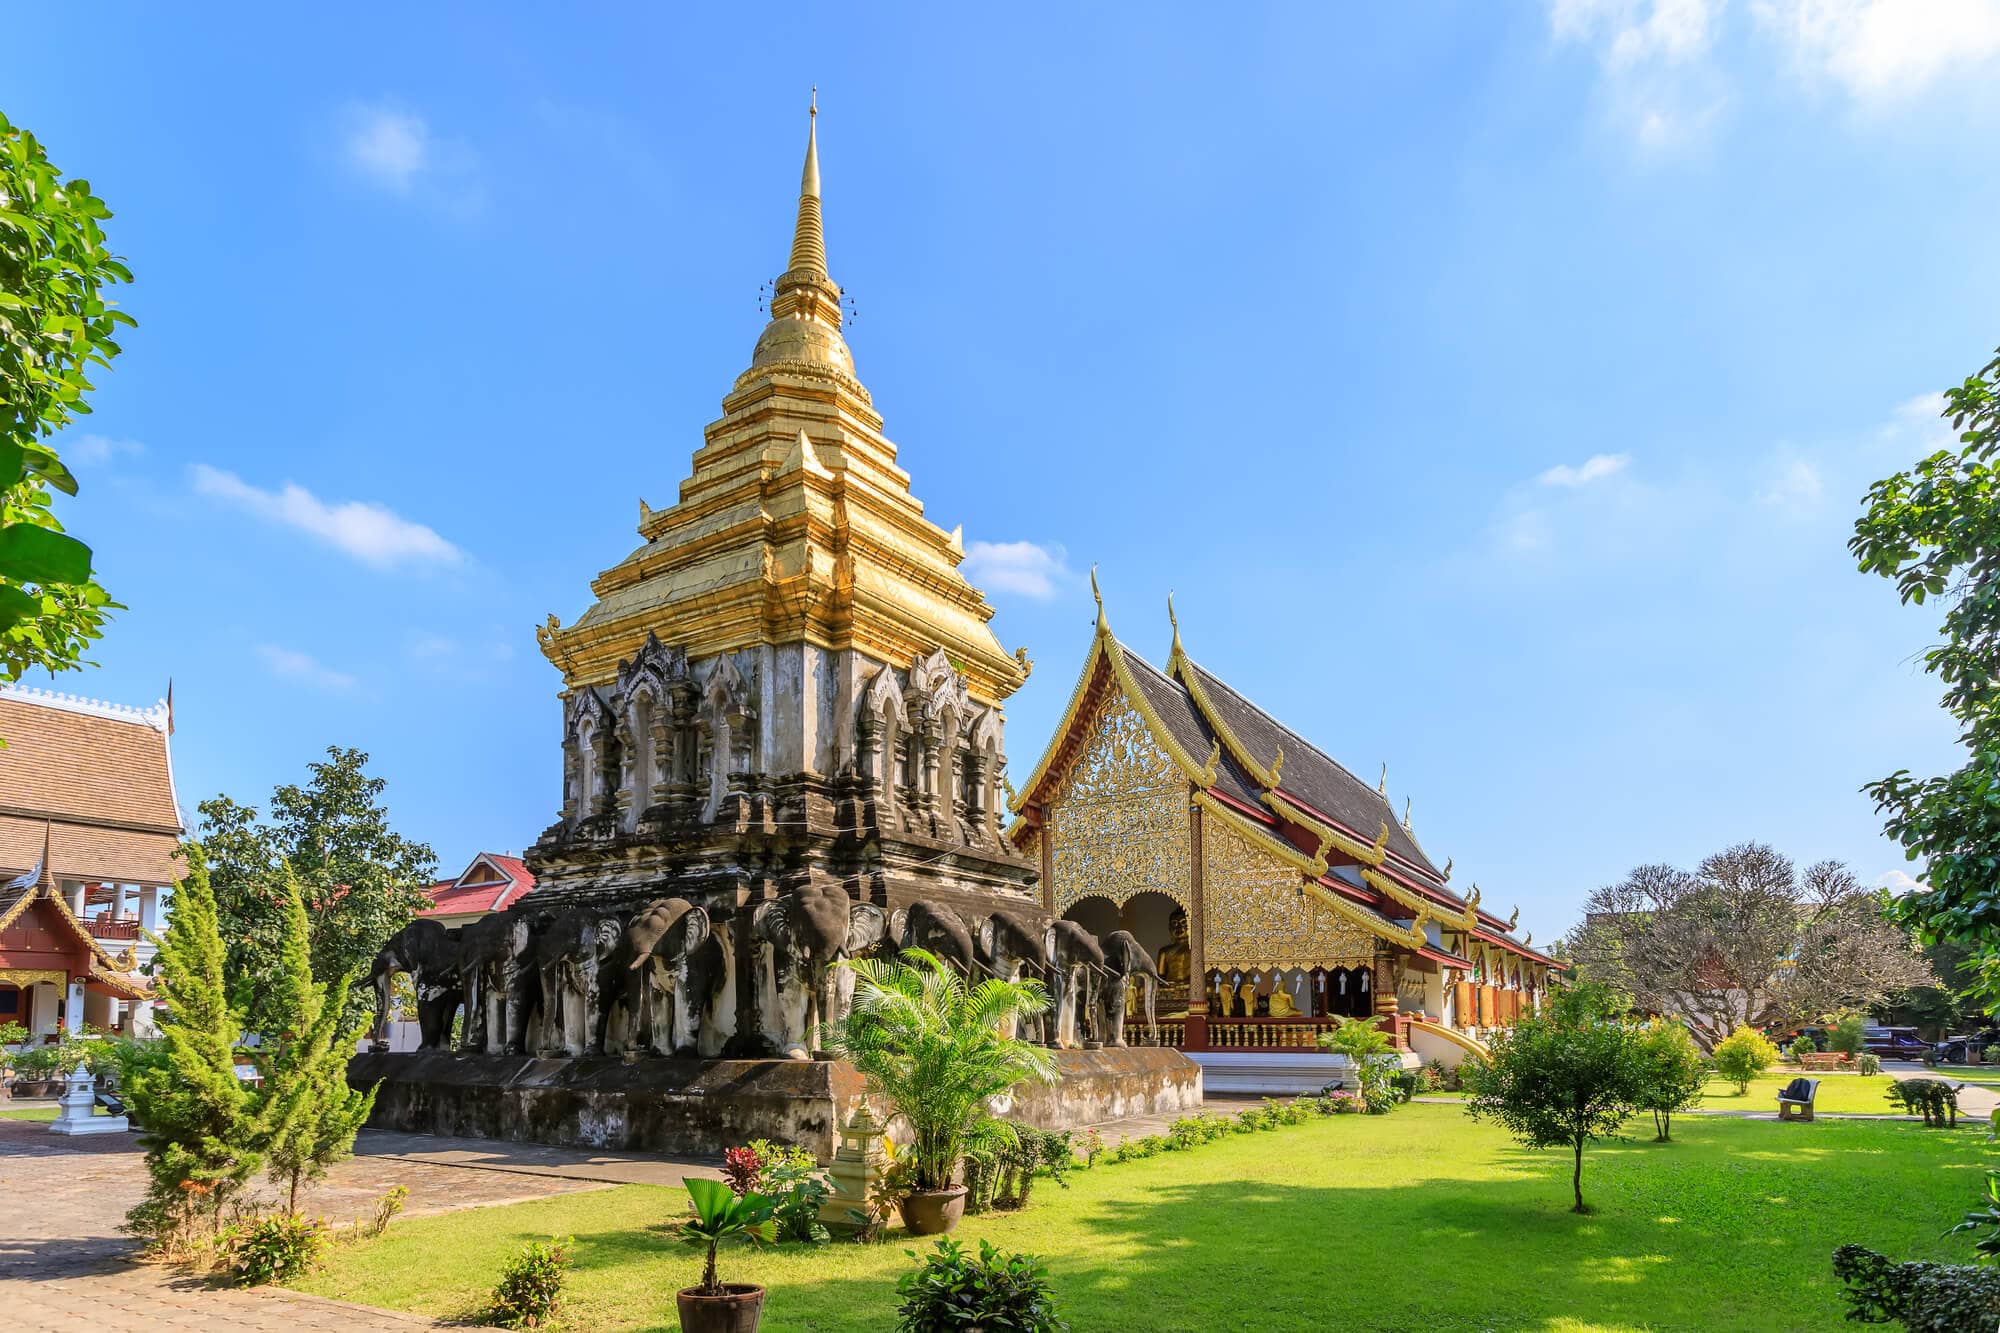 Gold pagoda next to a green lawn inside Wat Chiang Man temple in Chiang Mai on a sunny day.